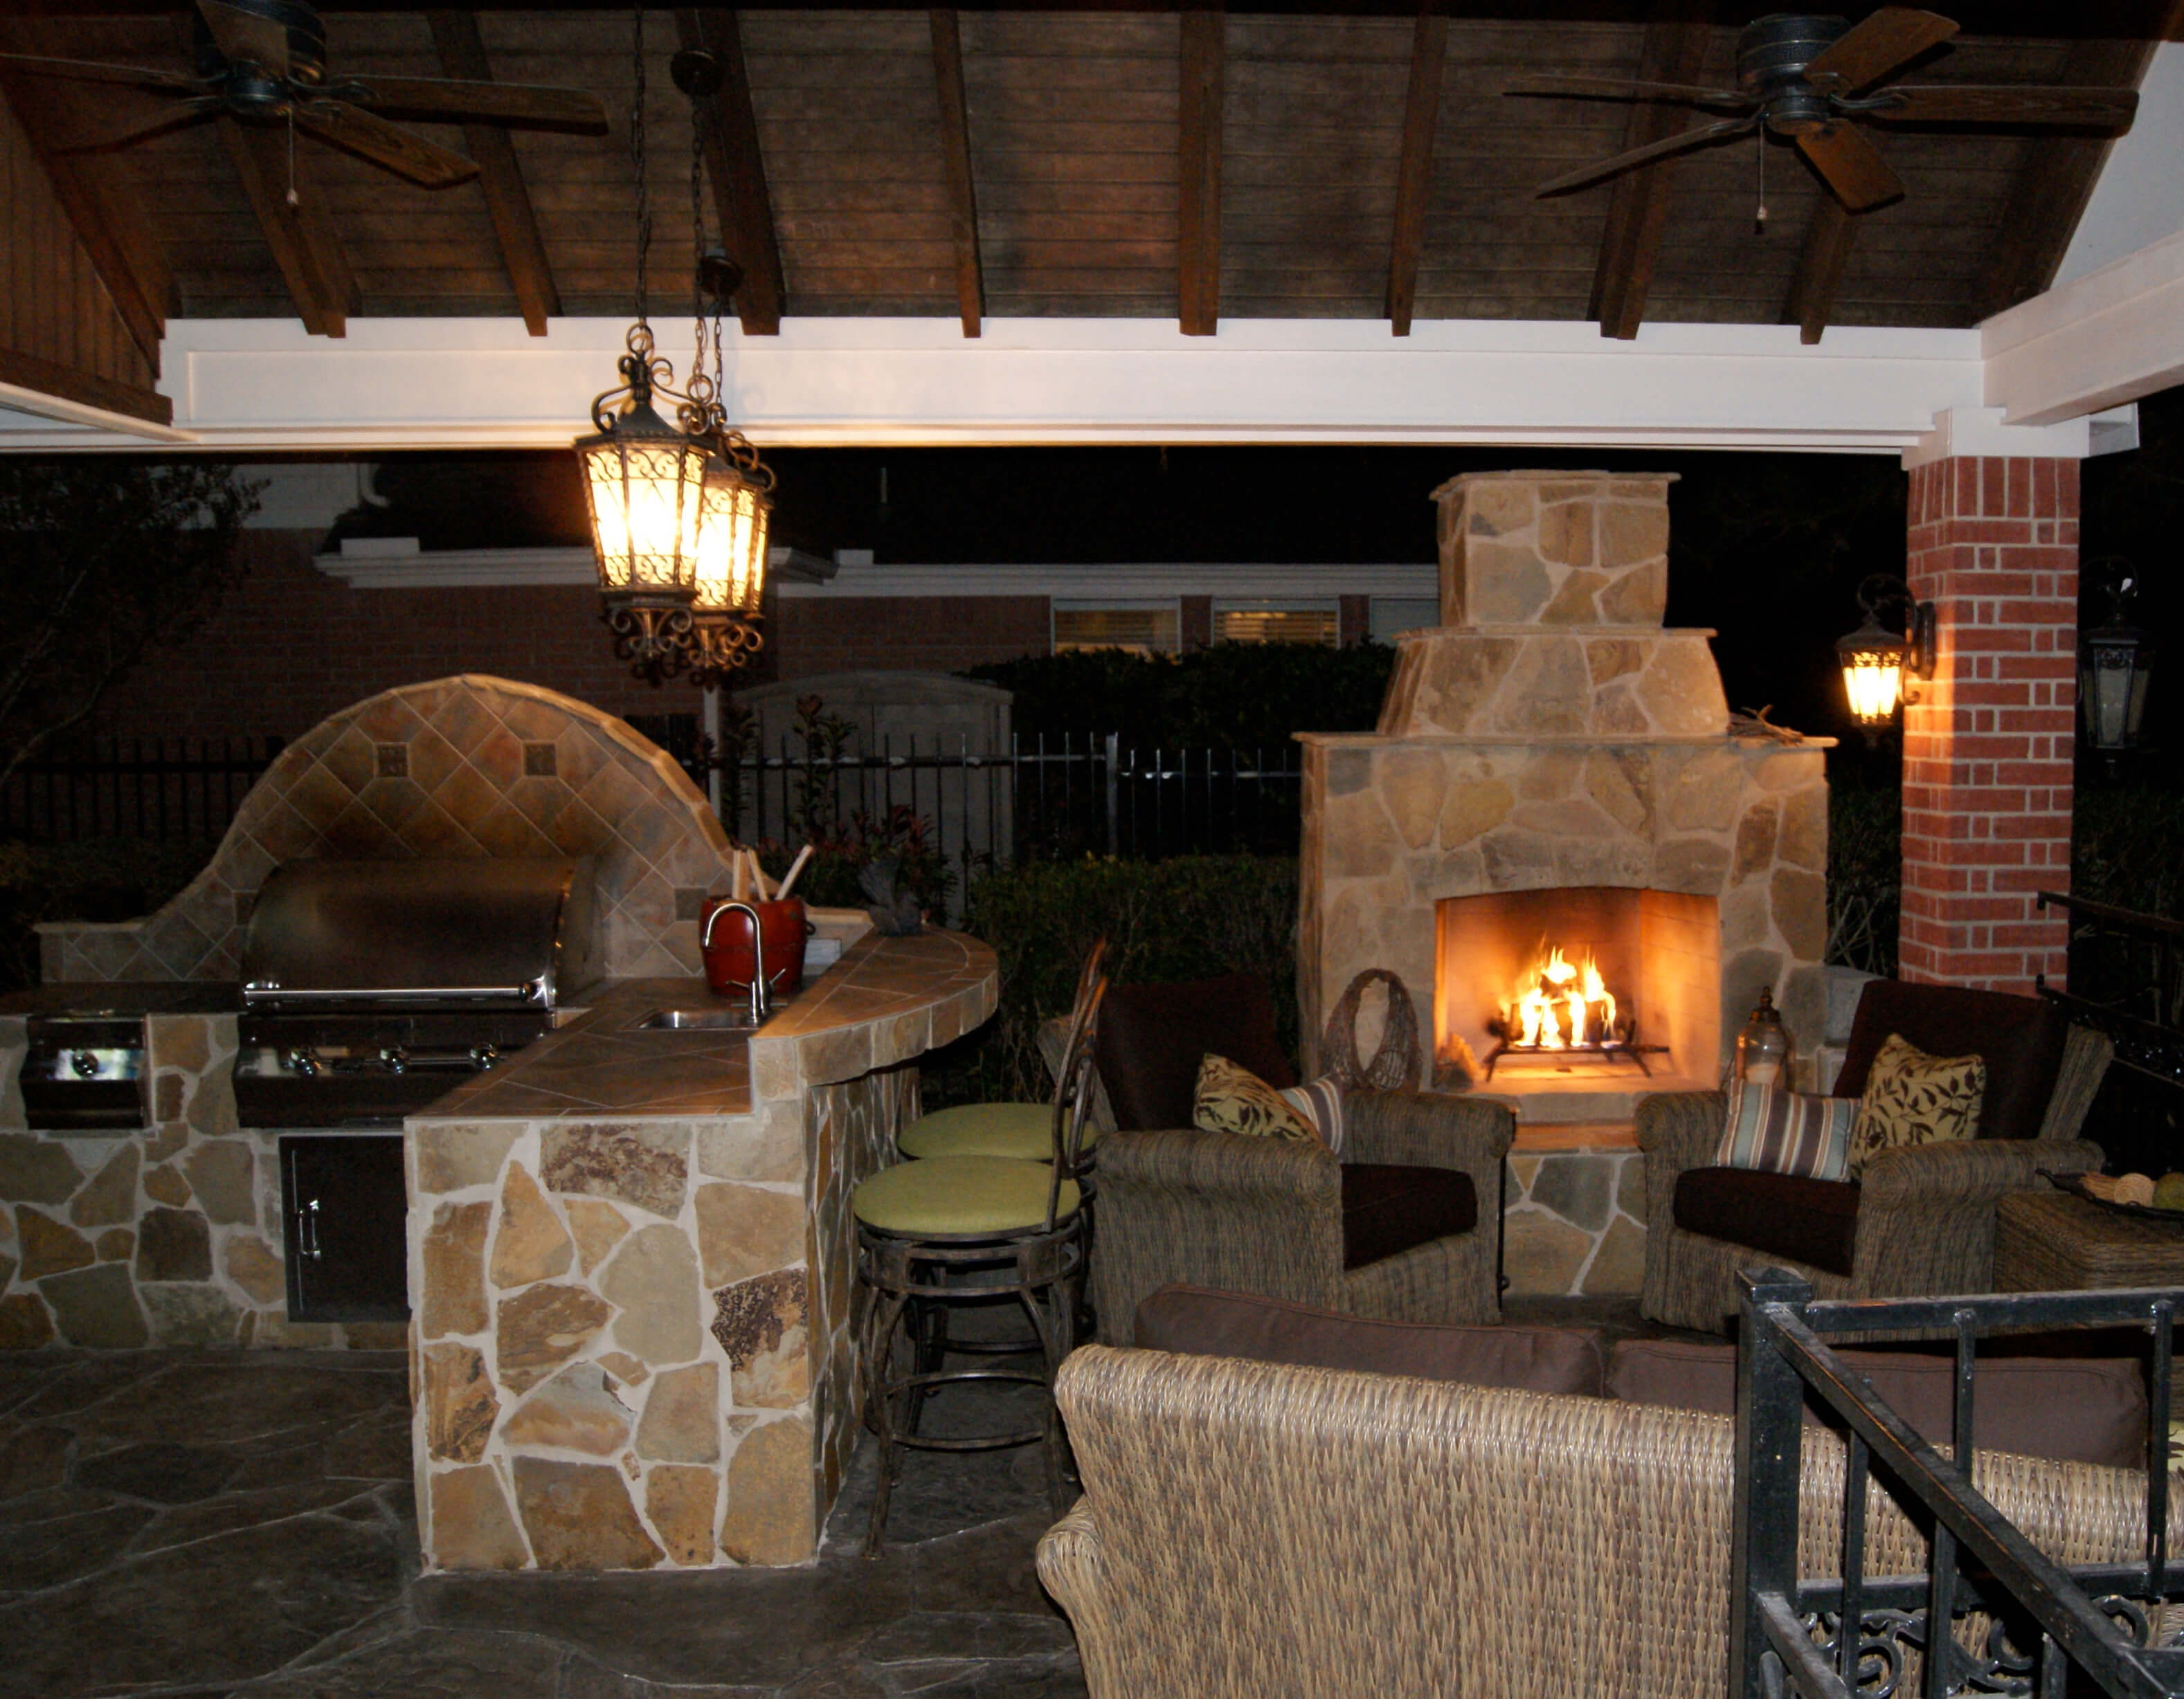 Gable Roof Patio Cover With Outdoor Kitchen & Fireplace - Texas Custom